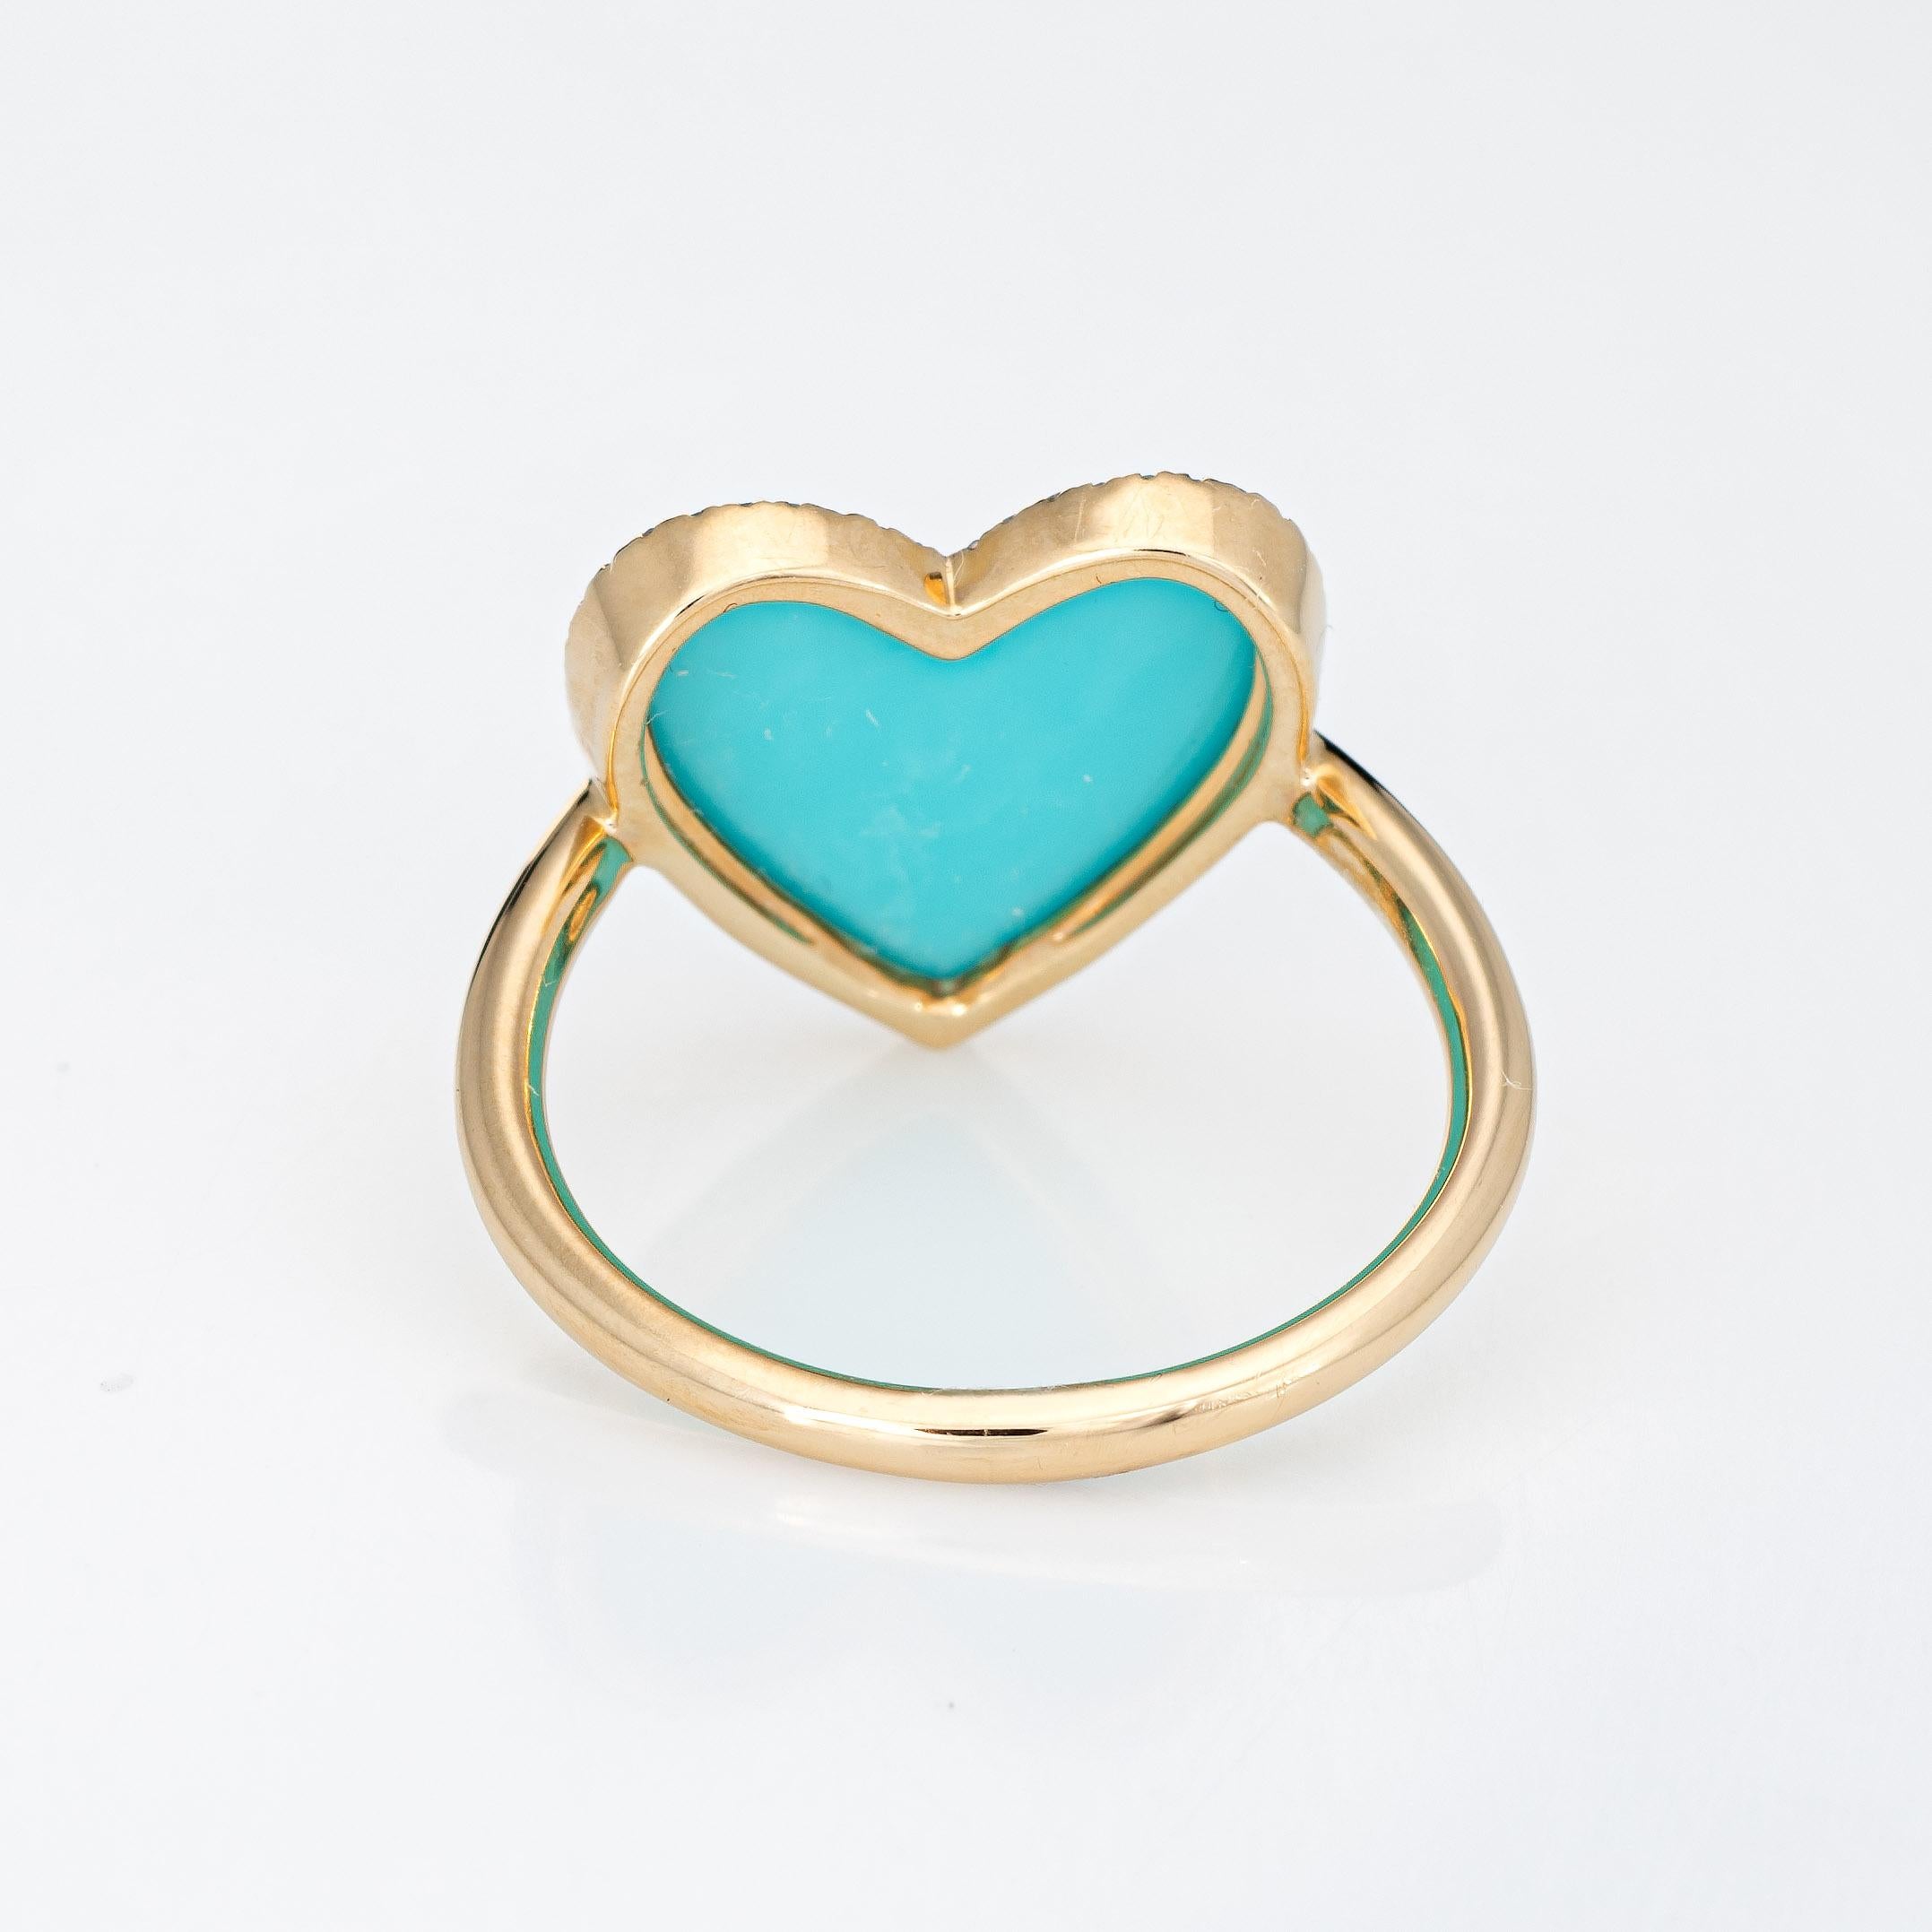 Heart Cut Turquoise Diamond Heart Ring Estate 14k Yellow Gold Large Cocktail Jewelry